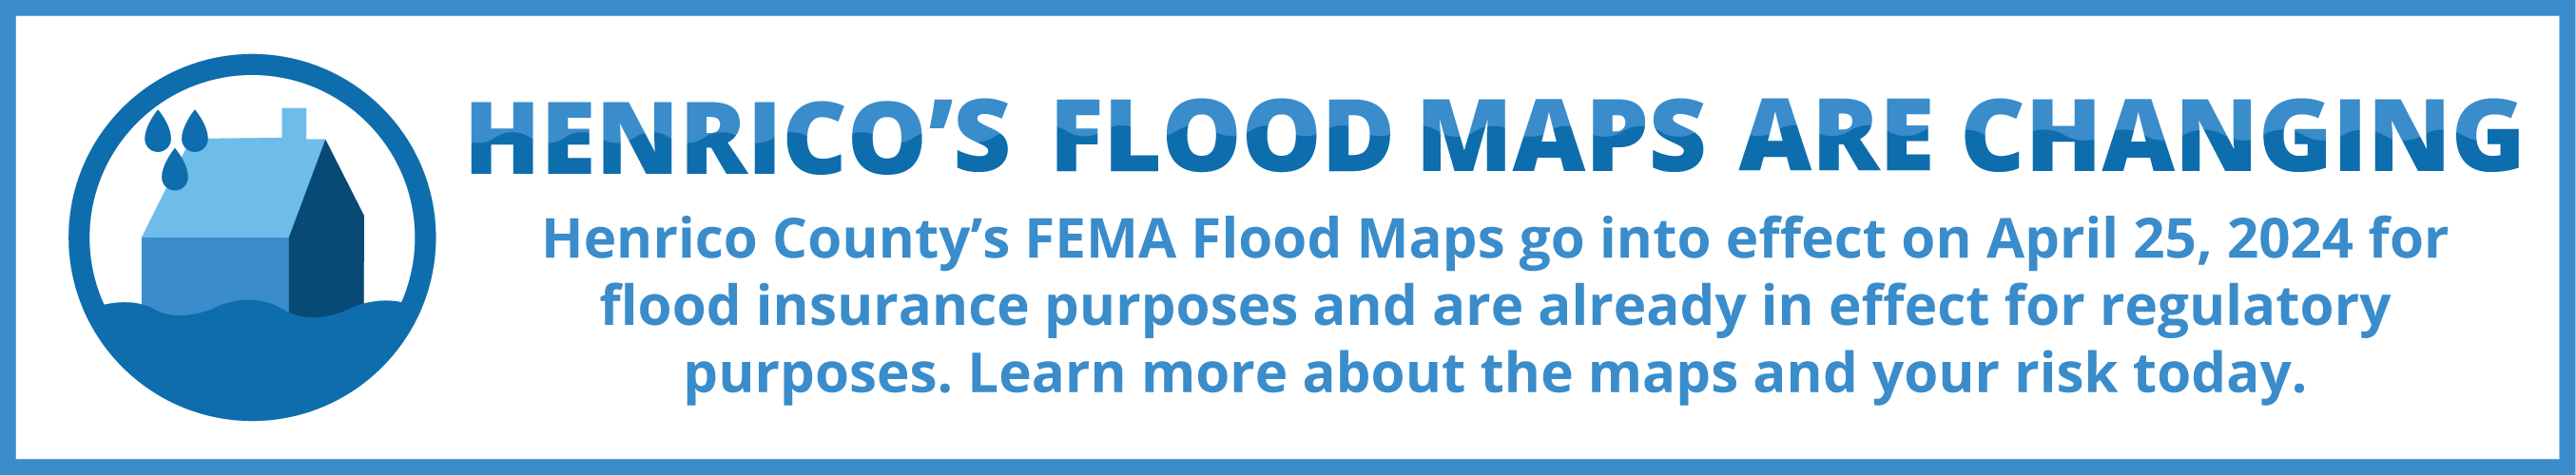 Henrico County’s FEMA Flood Maps go into effect on April 25, 2024 for flood insurance purposes and are already in effect for regulatory purposes. Learn more about the maps and your risk today.